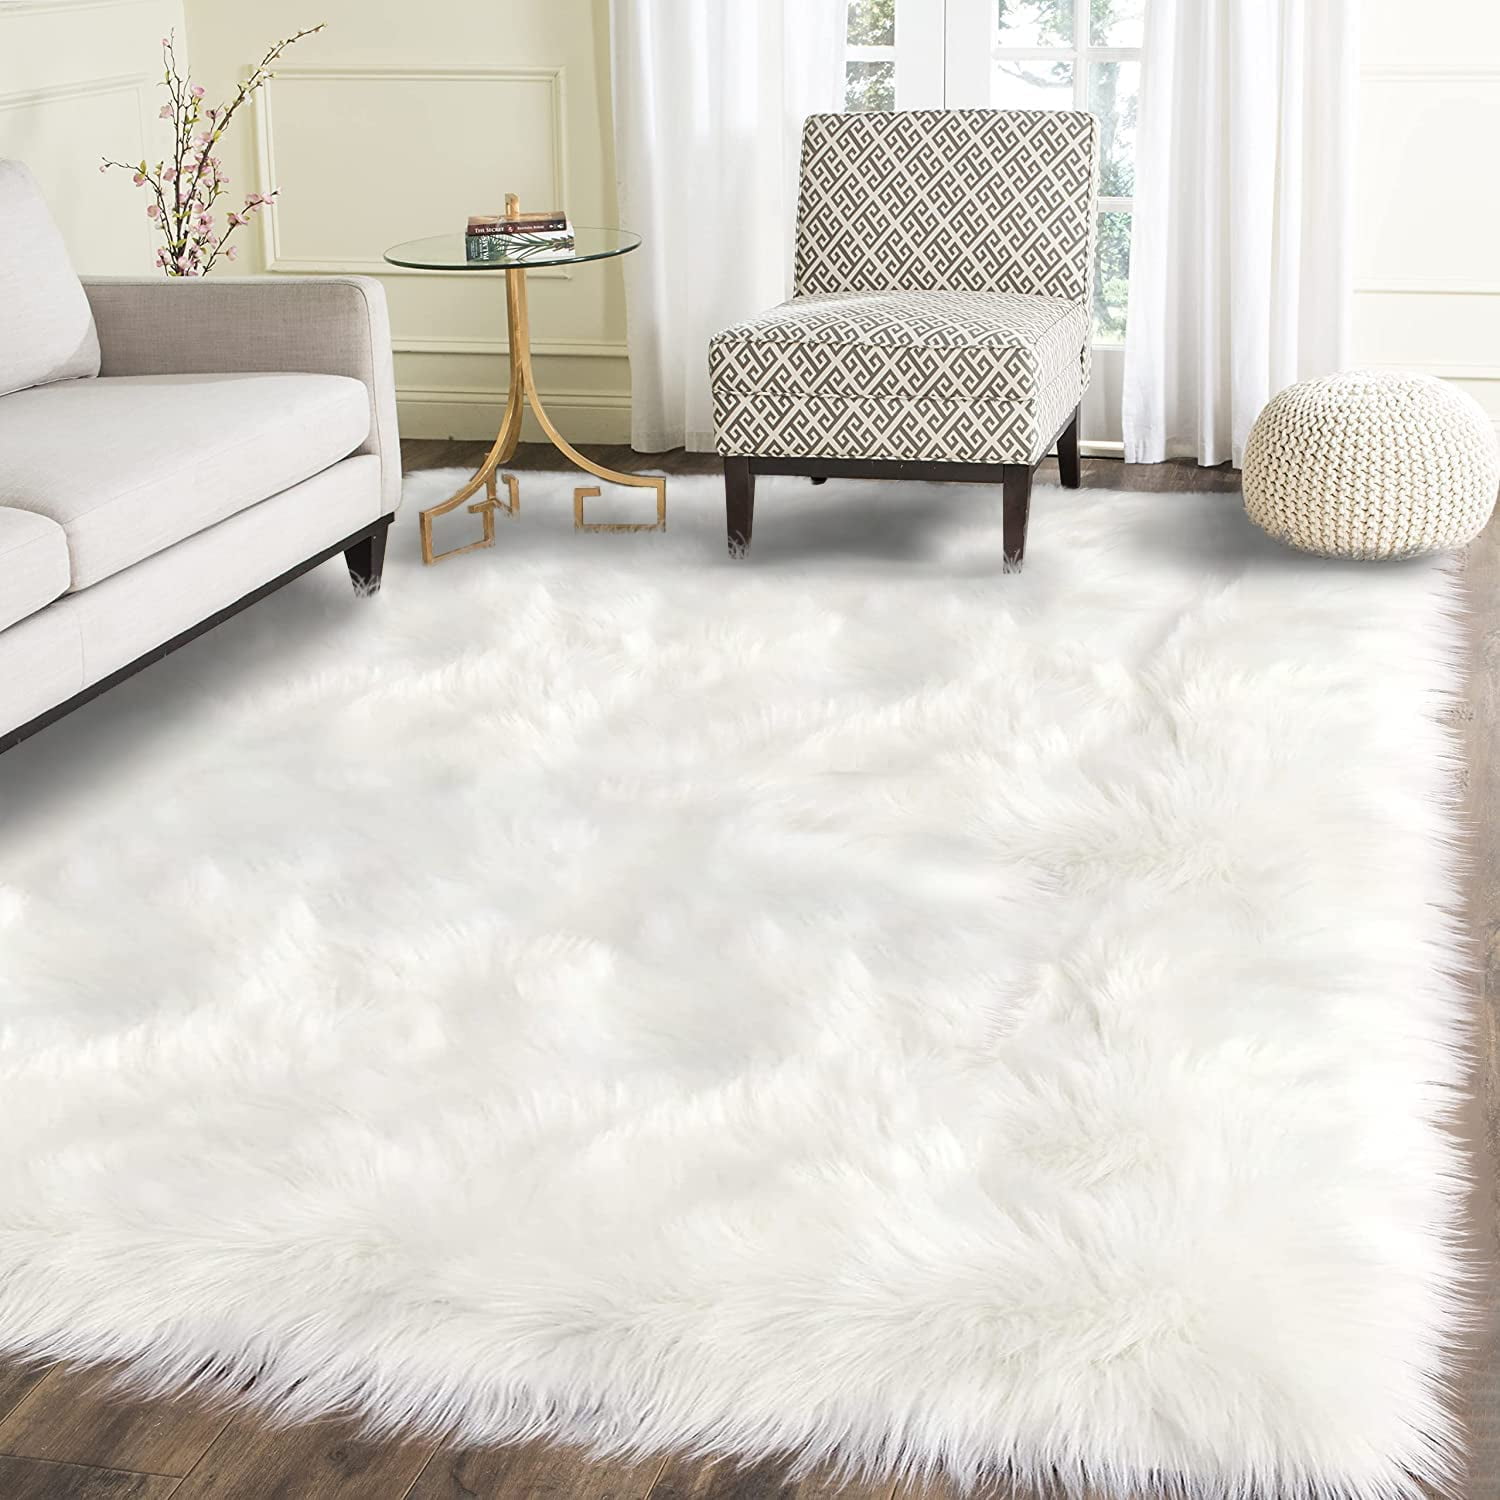 Ultra Luxurious Fluffy Rectangle Area Rug,Soft and Thick Faux Fur Rug,Grey  Rug Non Slip,Small Rug for Bedroom Bedside Living Room,Fuzzy Rug,Shag Rug,2x3  Feet, Grey